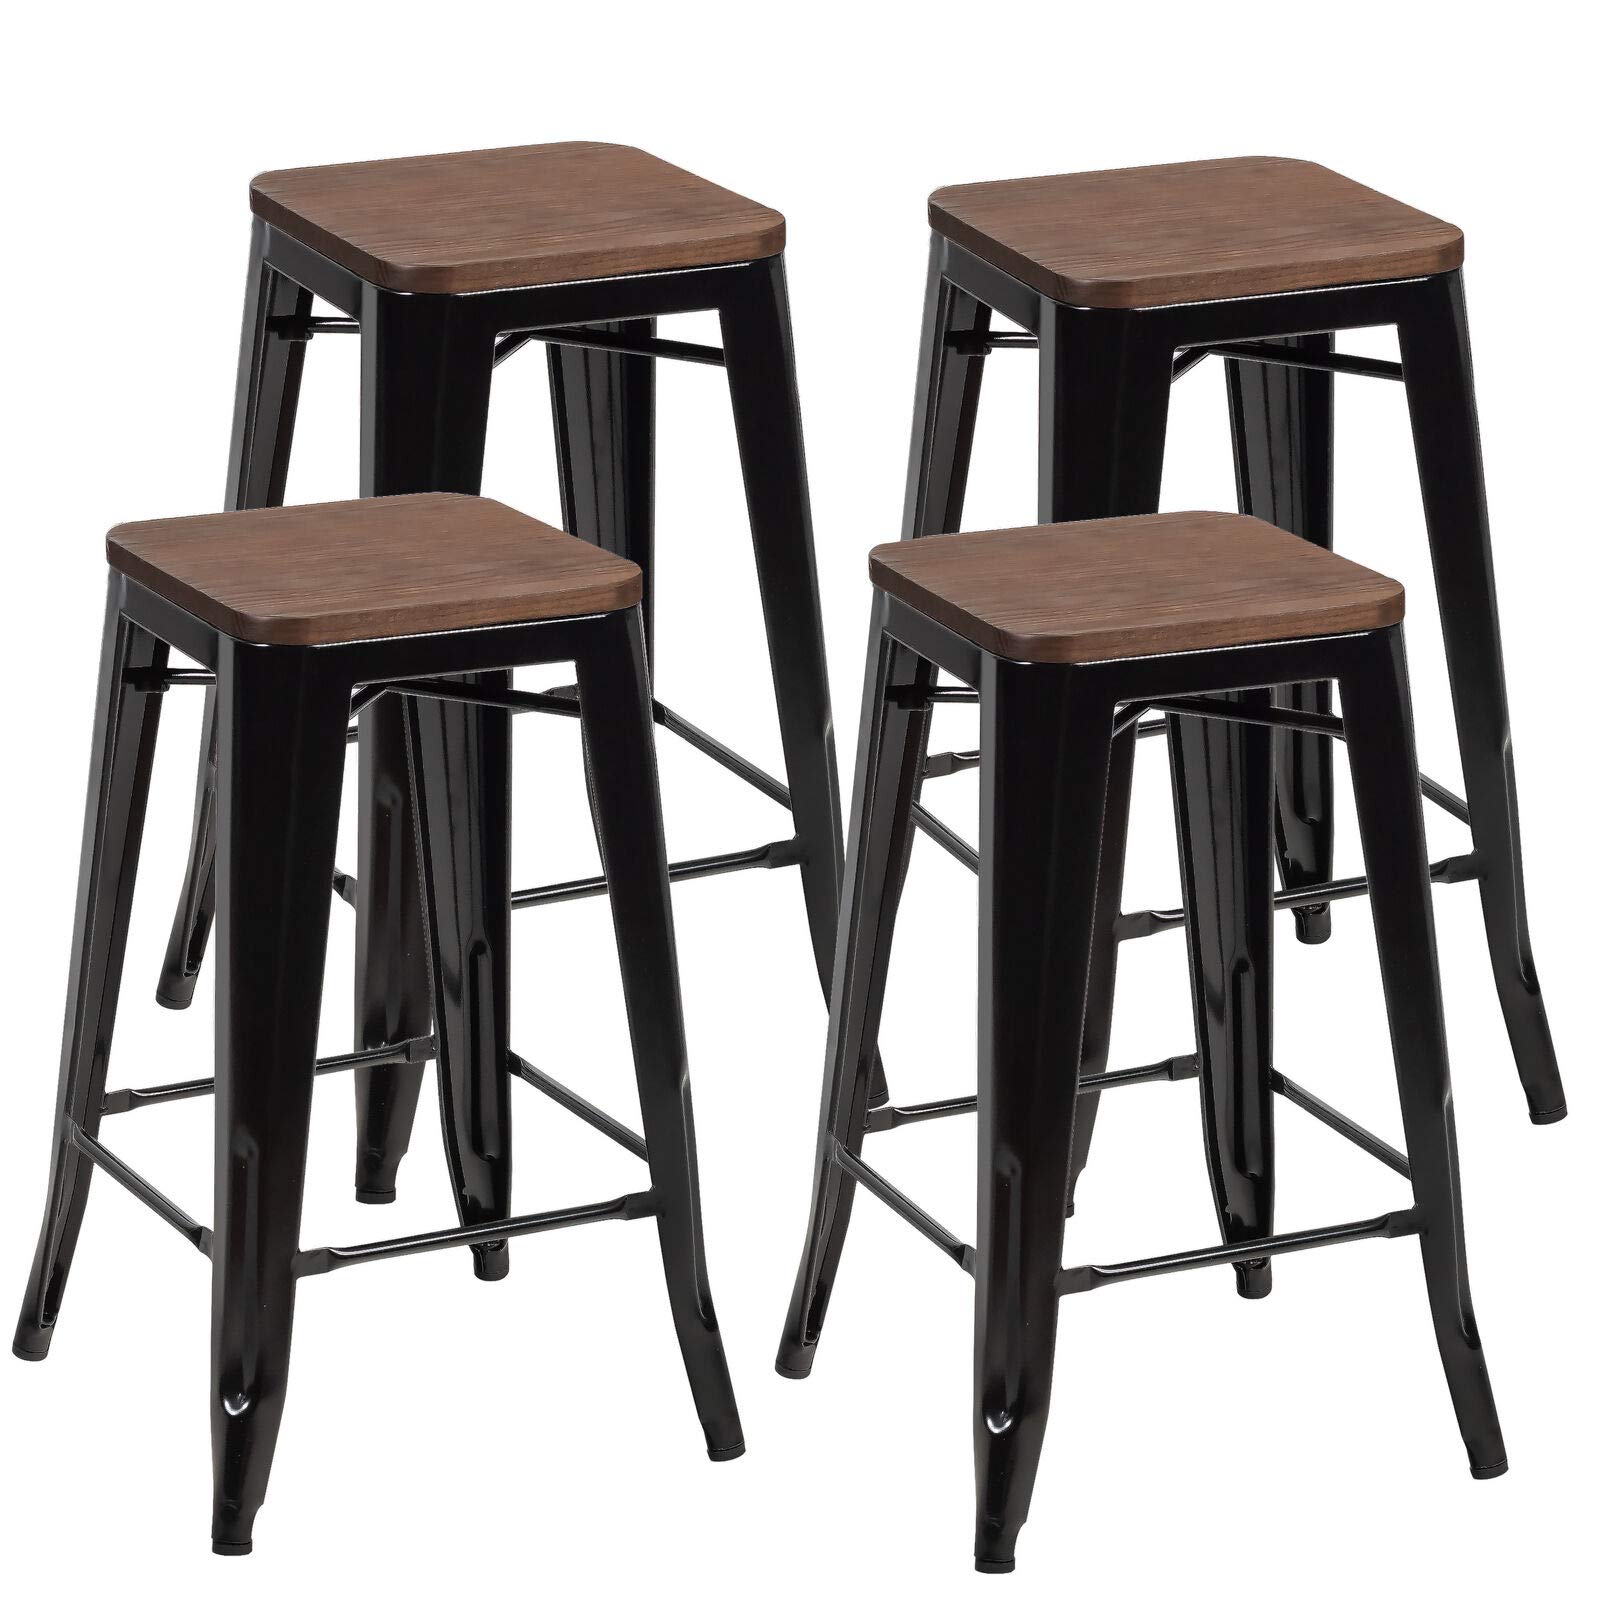 26 inch Metal Bar Stool Set of 4, Counter Height Backless Stool with Wooden Seat